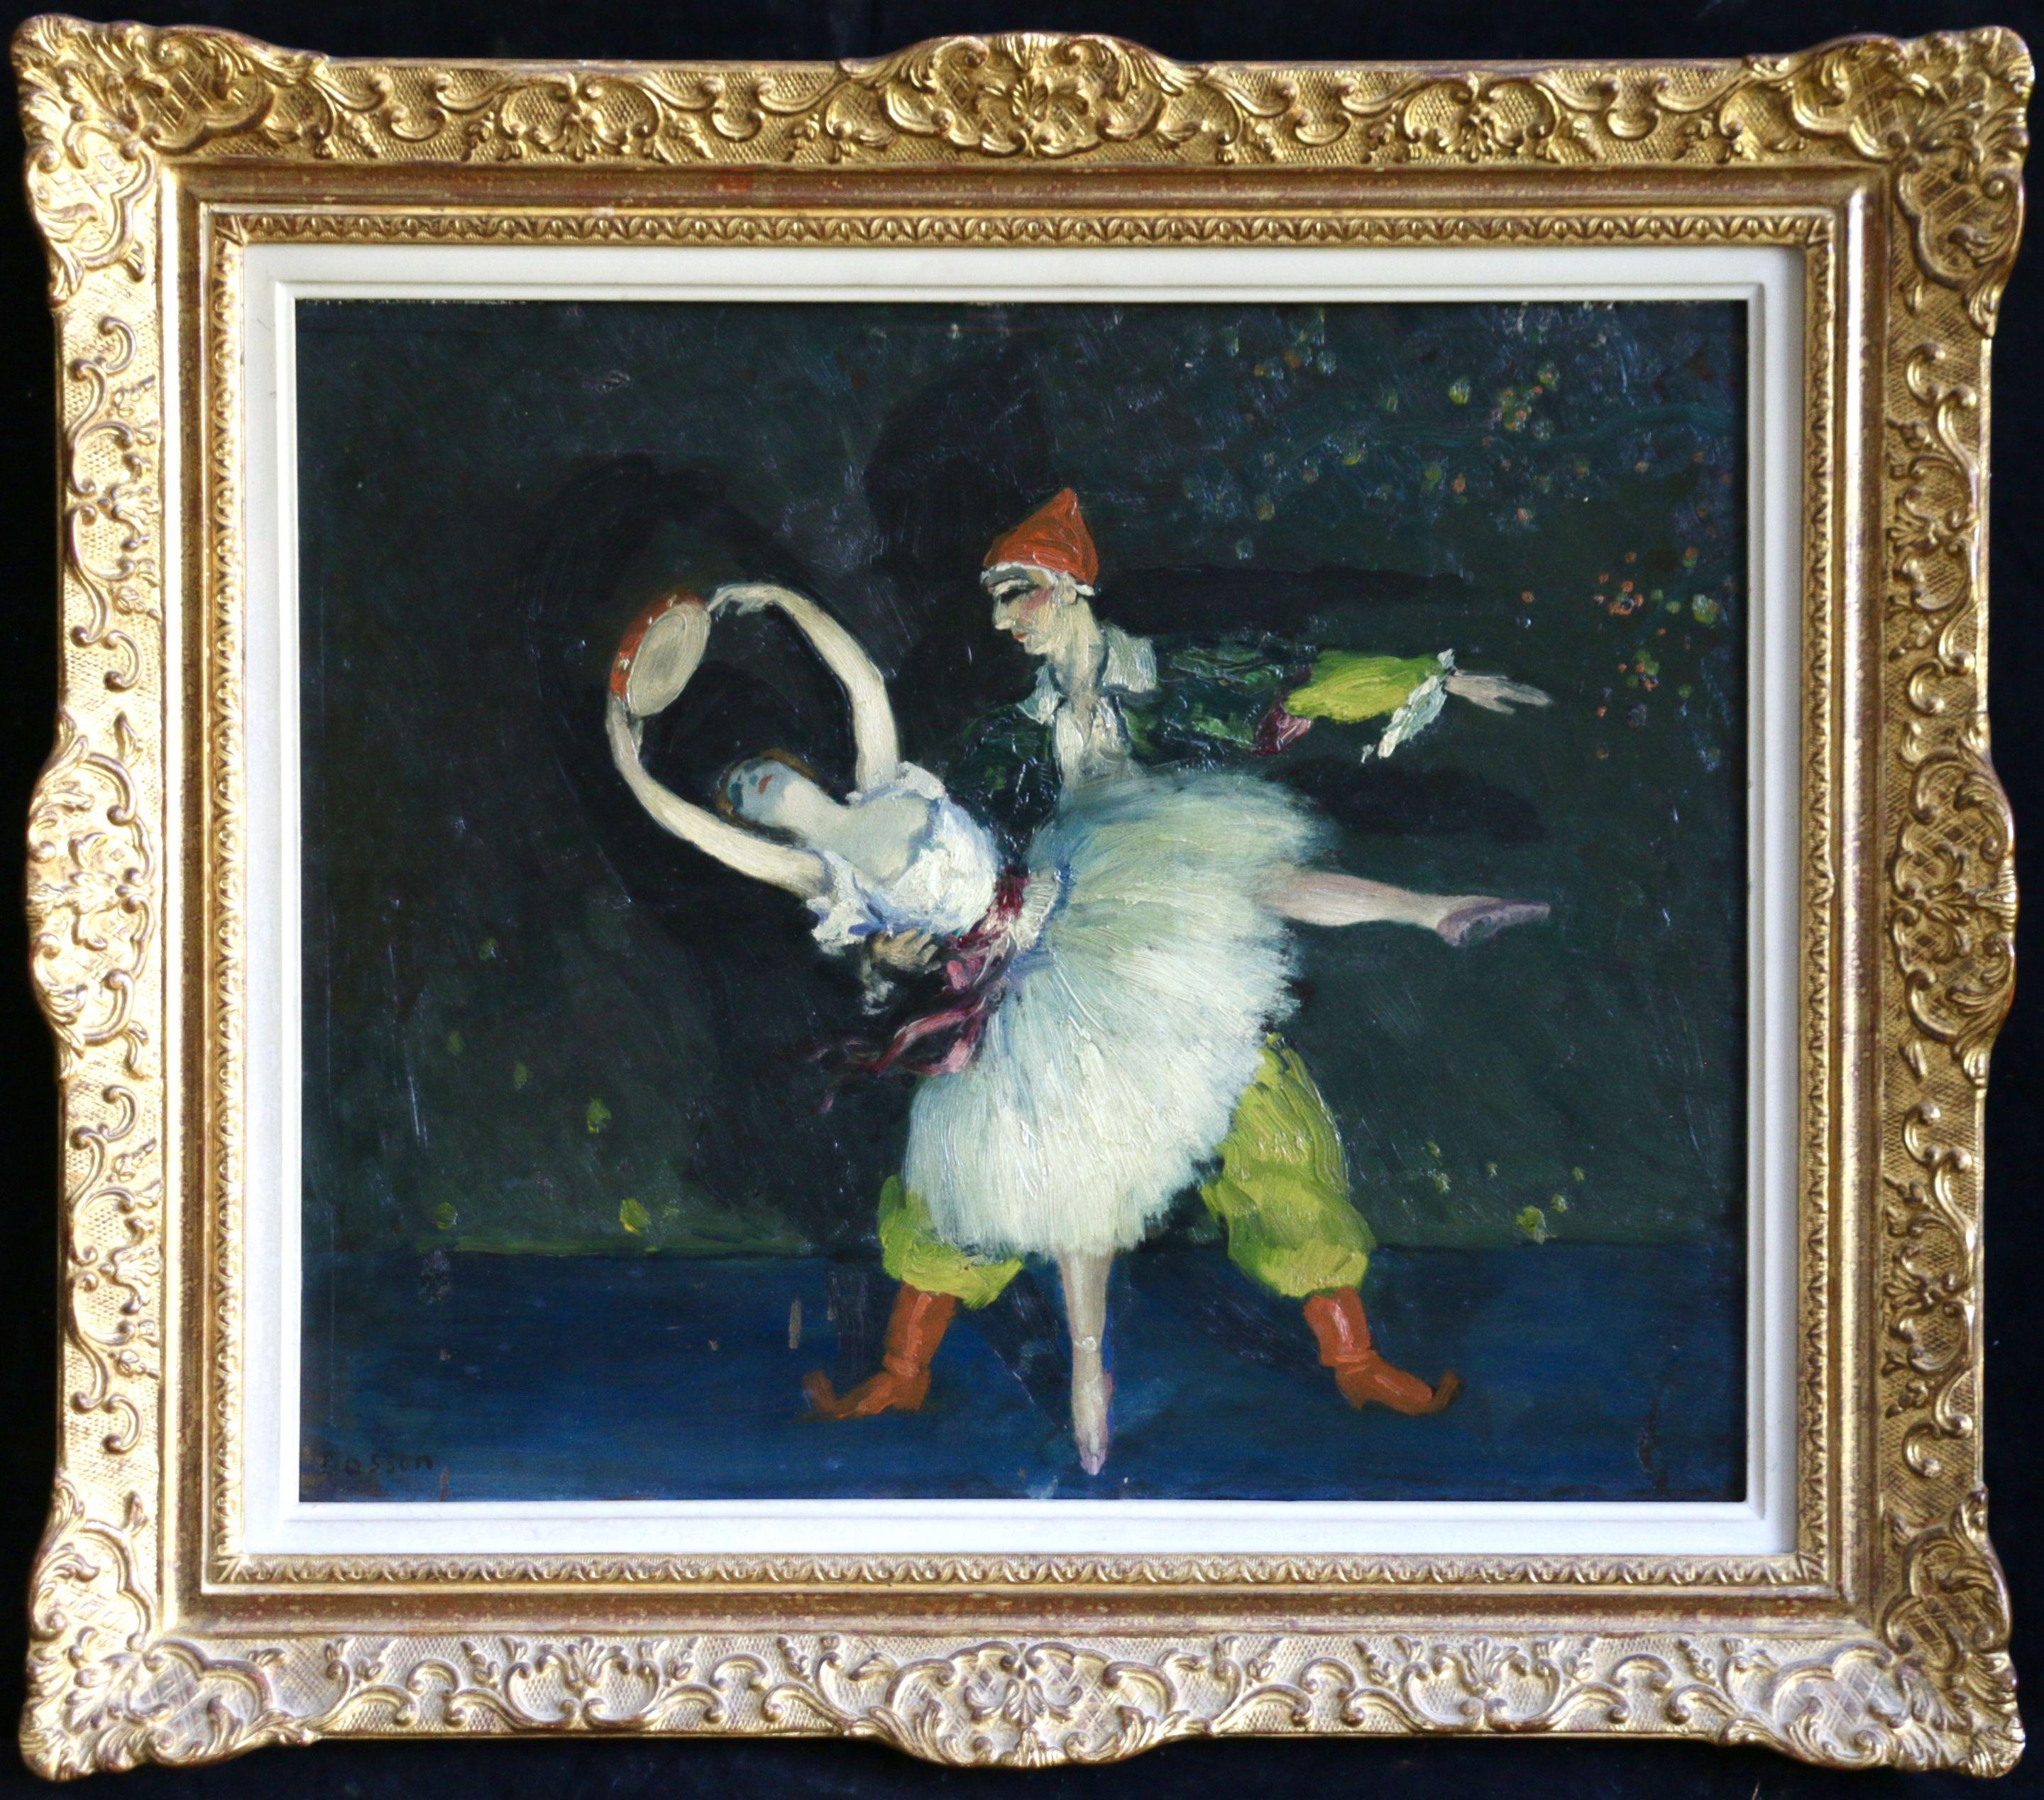 Jean-Louis-Marcel Cosson Figurative Painting - Pierrot & Dancer - 20th Century Oil, Figures Dancing in Interior by Cosson